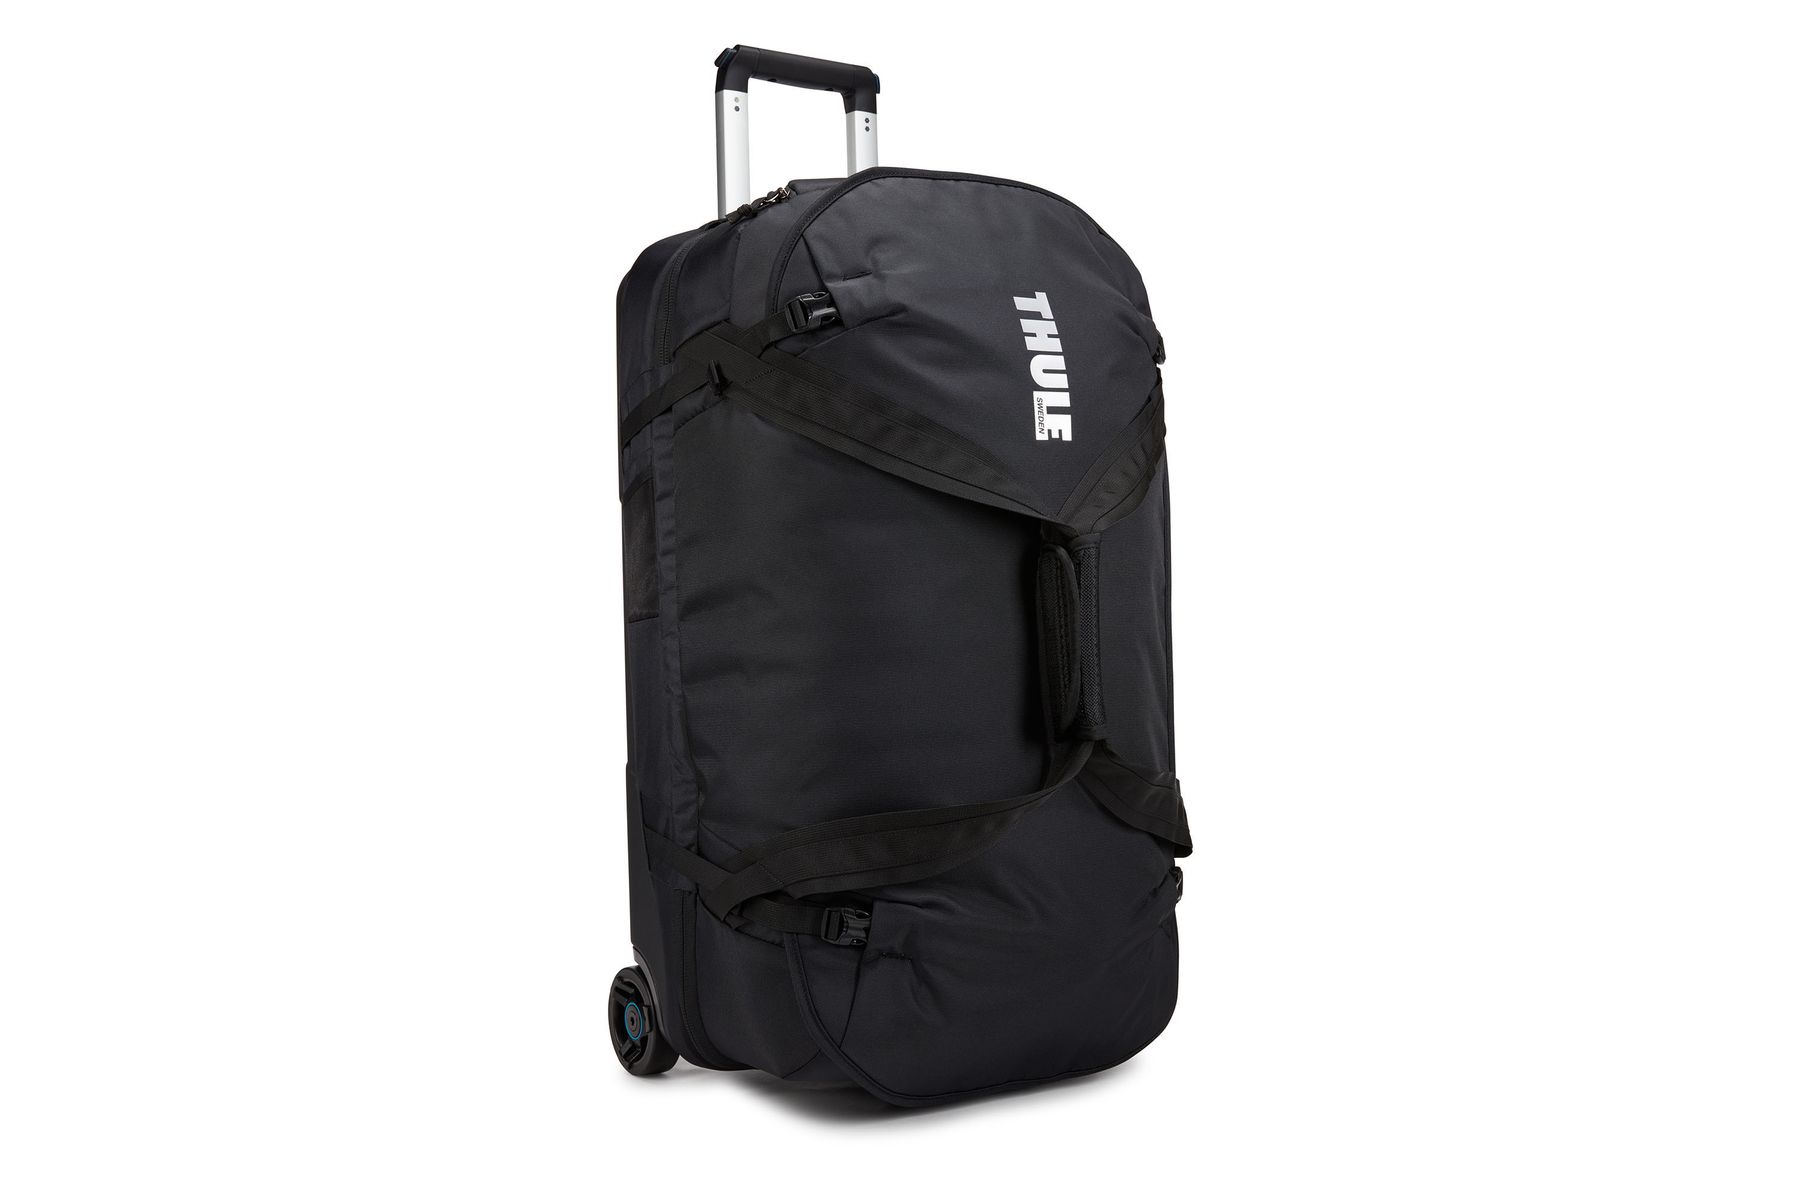 Thule Luggage: Combining Durability and Design